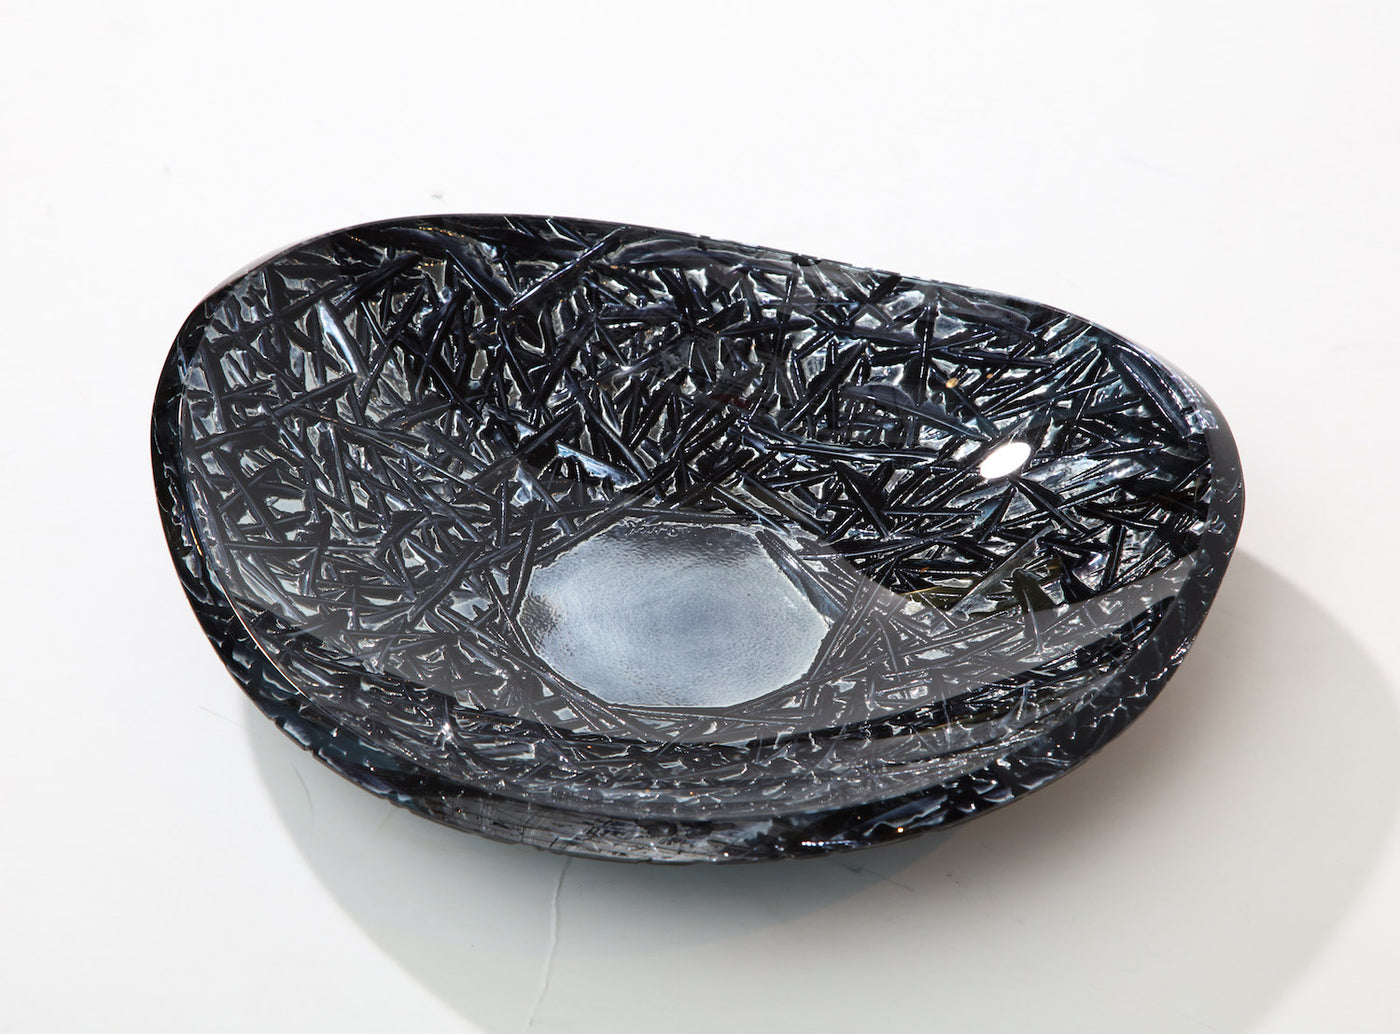 Studio-Made Carved Glass Dish #6 by Ghiró Studio